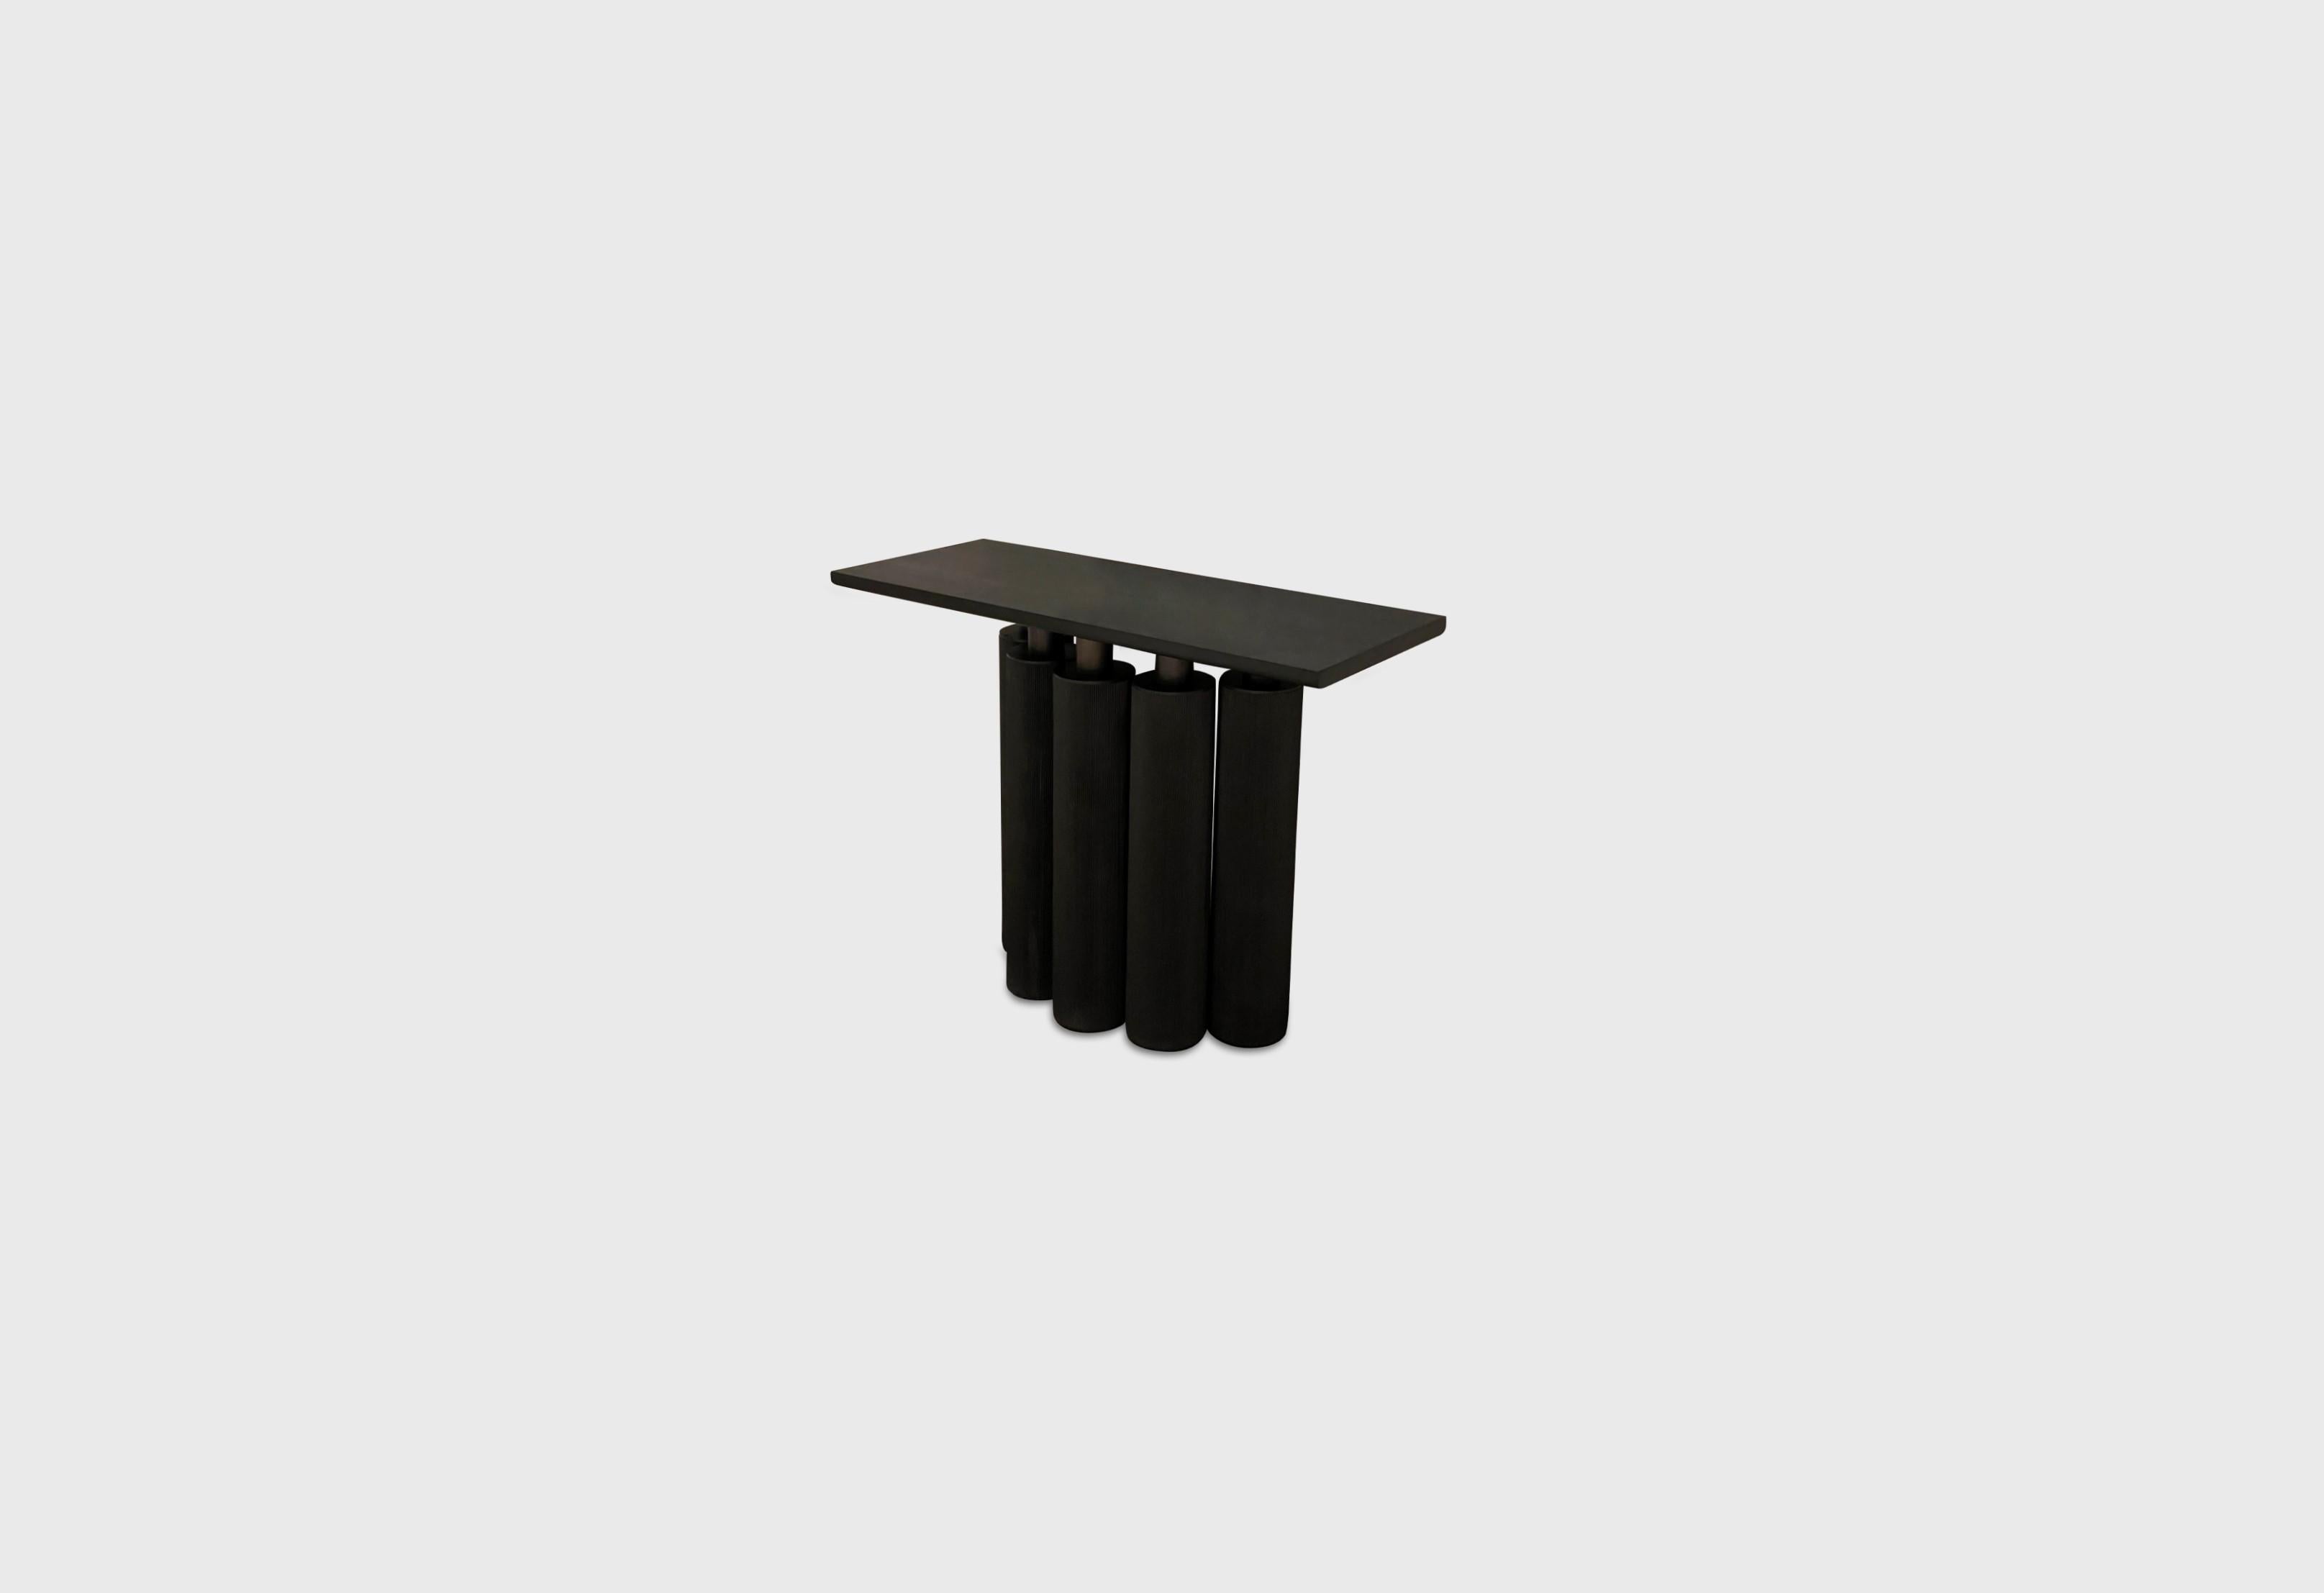 Options: Wood top, textured wood legs and Brass Detail
Designer: Alexander Diaz Anderson

Dimensions: 
L 120.0cm/47.2”
D 45.0cm/17.7”
H 90.0cm/35.4”


All your items are customizable to your requirements and specifications.